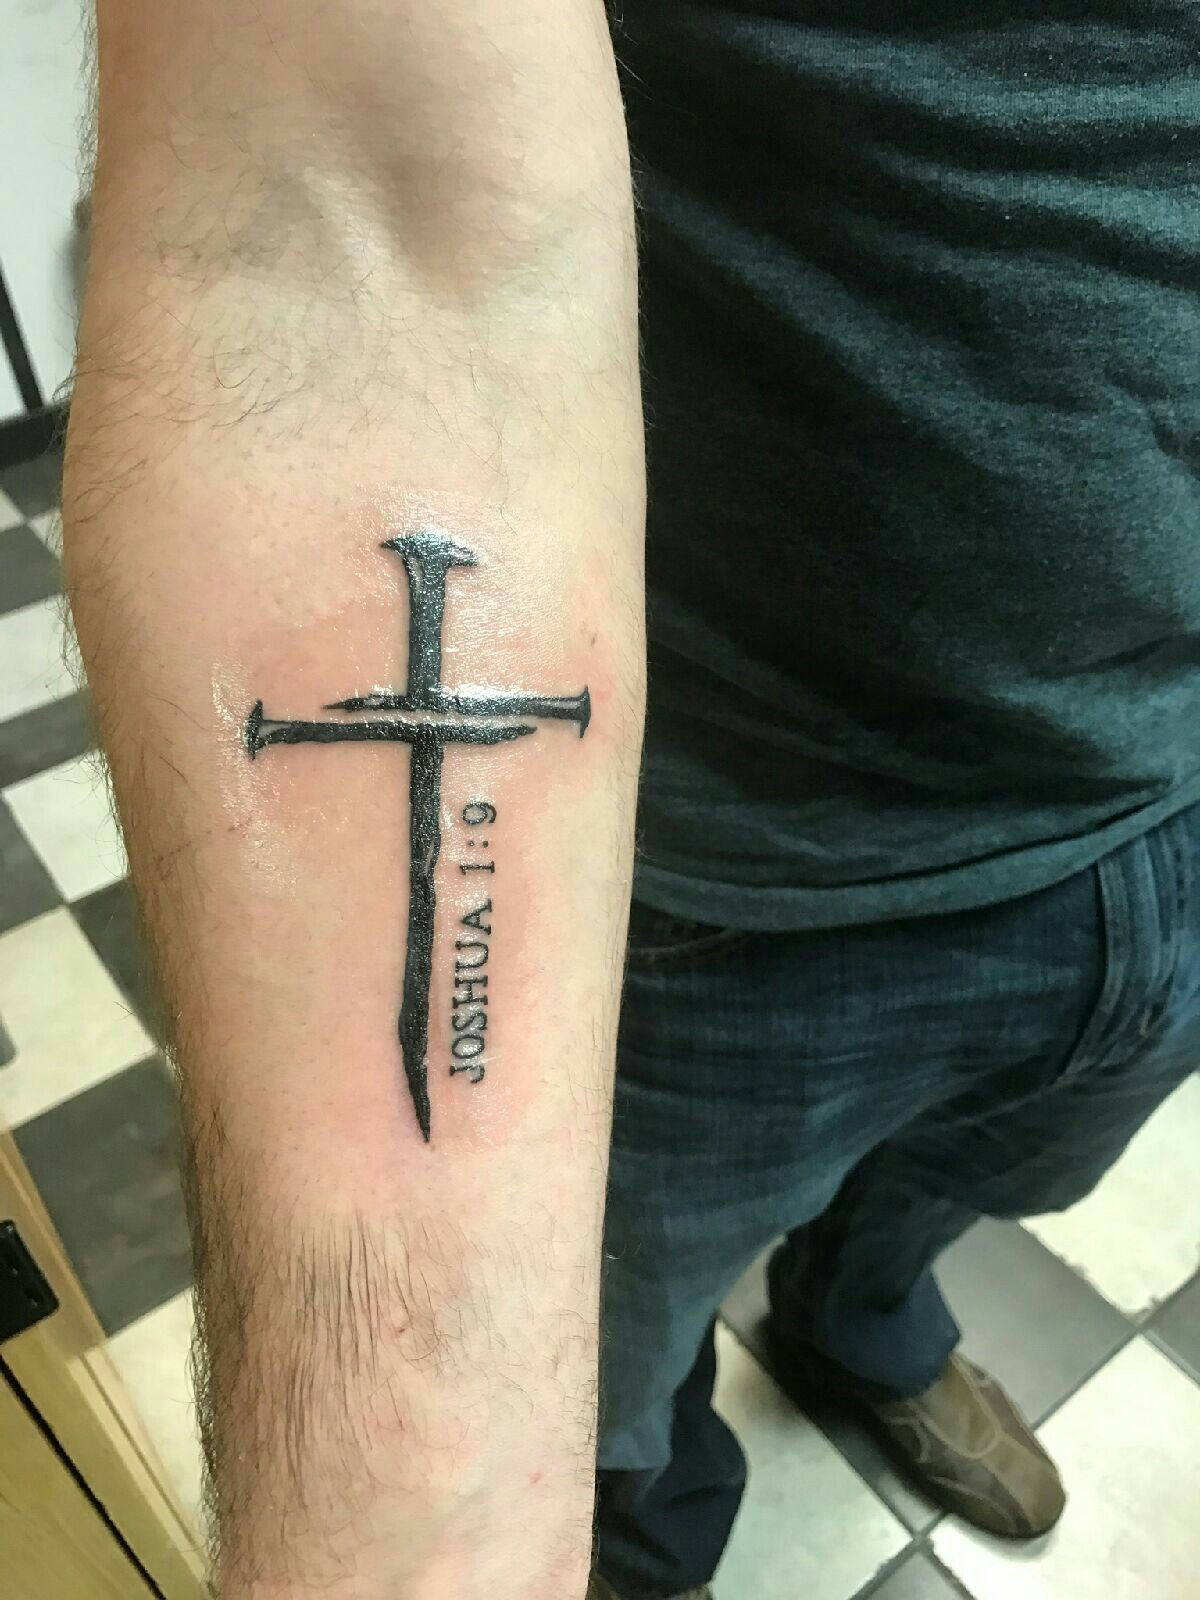 My Nail Cross Tattoo With Joshua 19 Ink Cross Tattoo Designs pertaining to dimensions 1200 X 1600